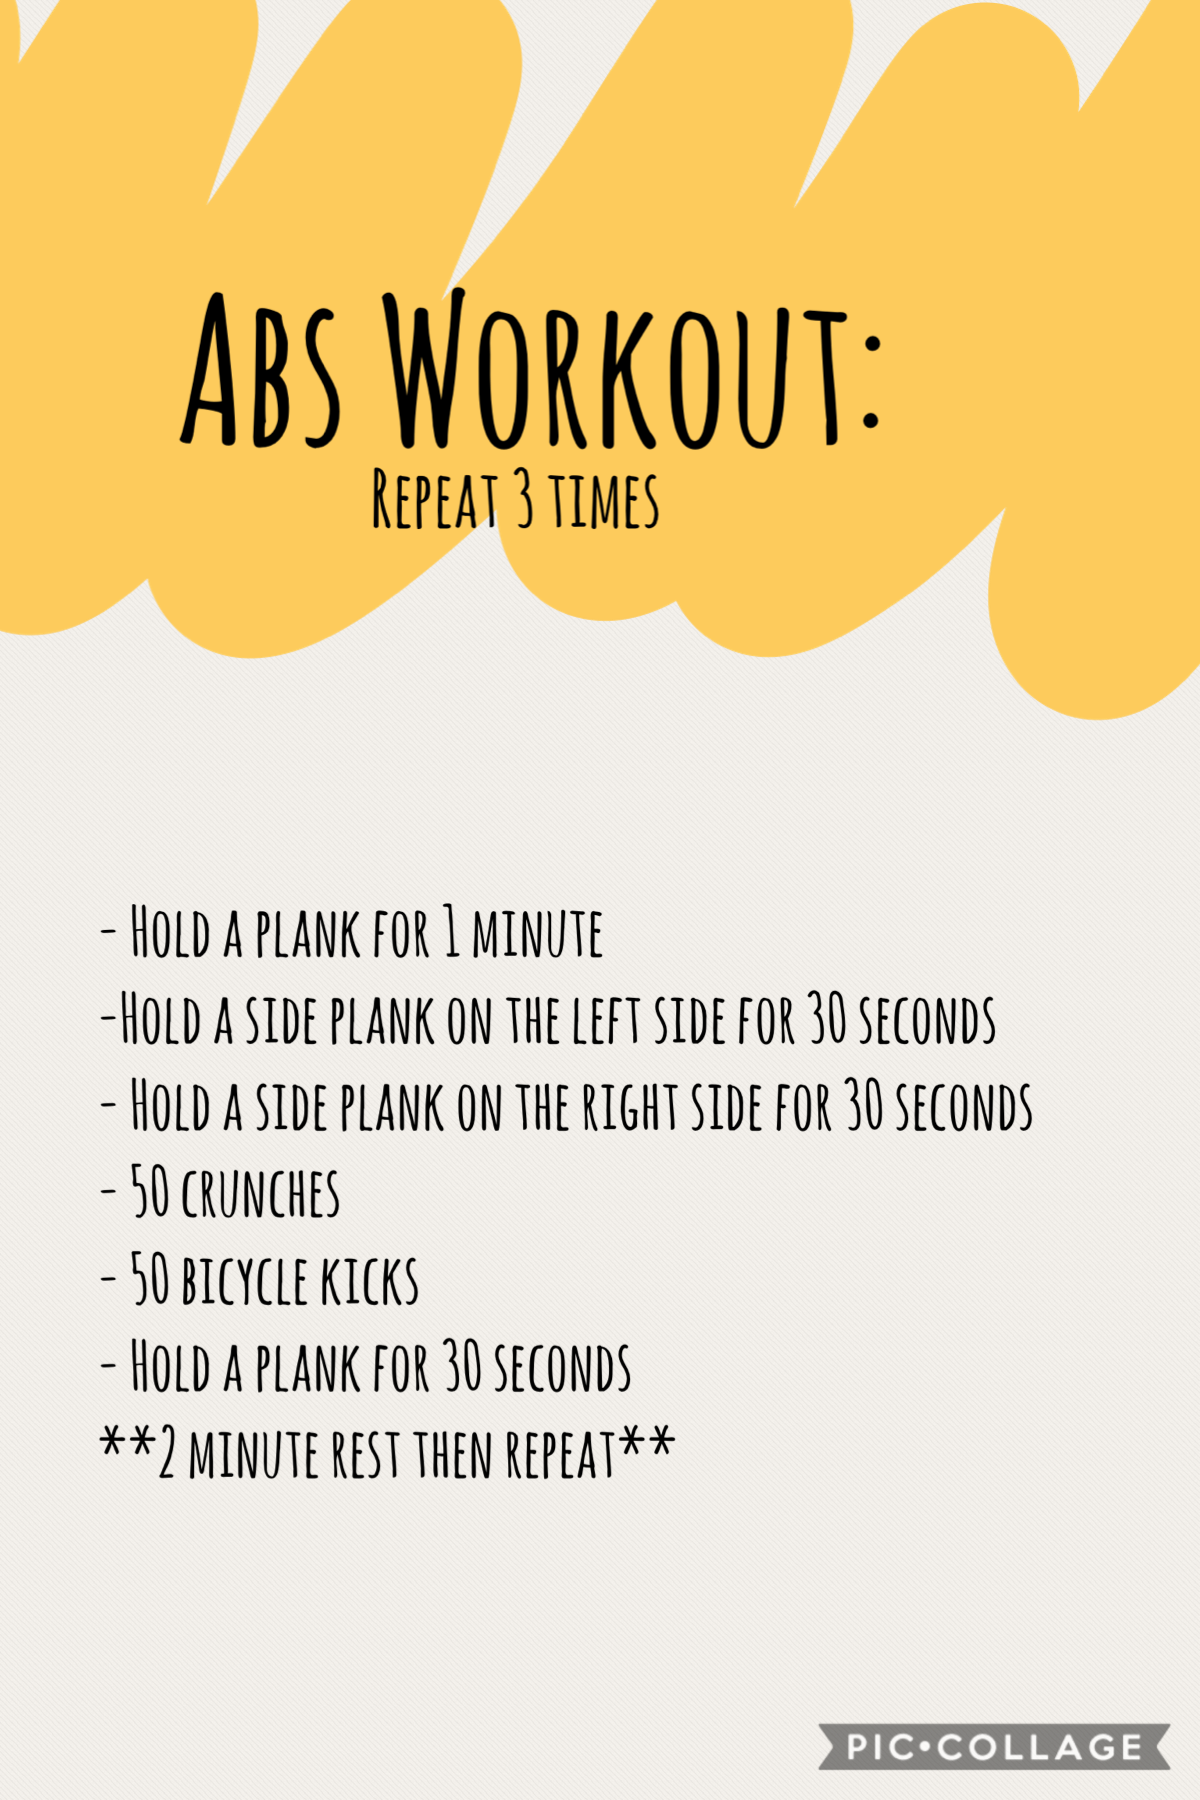 ☀️Abs Workout☀️